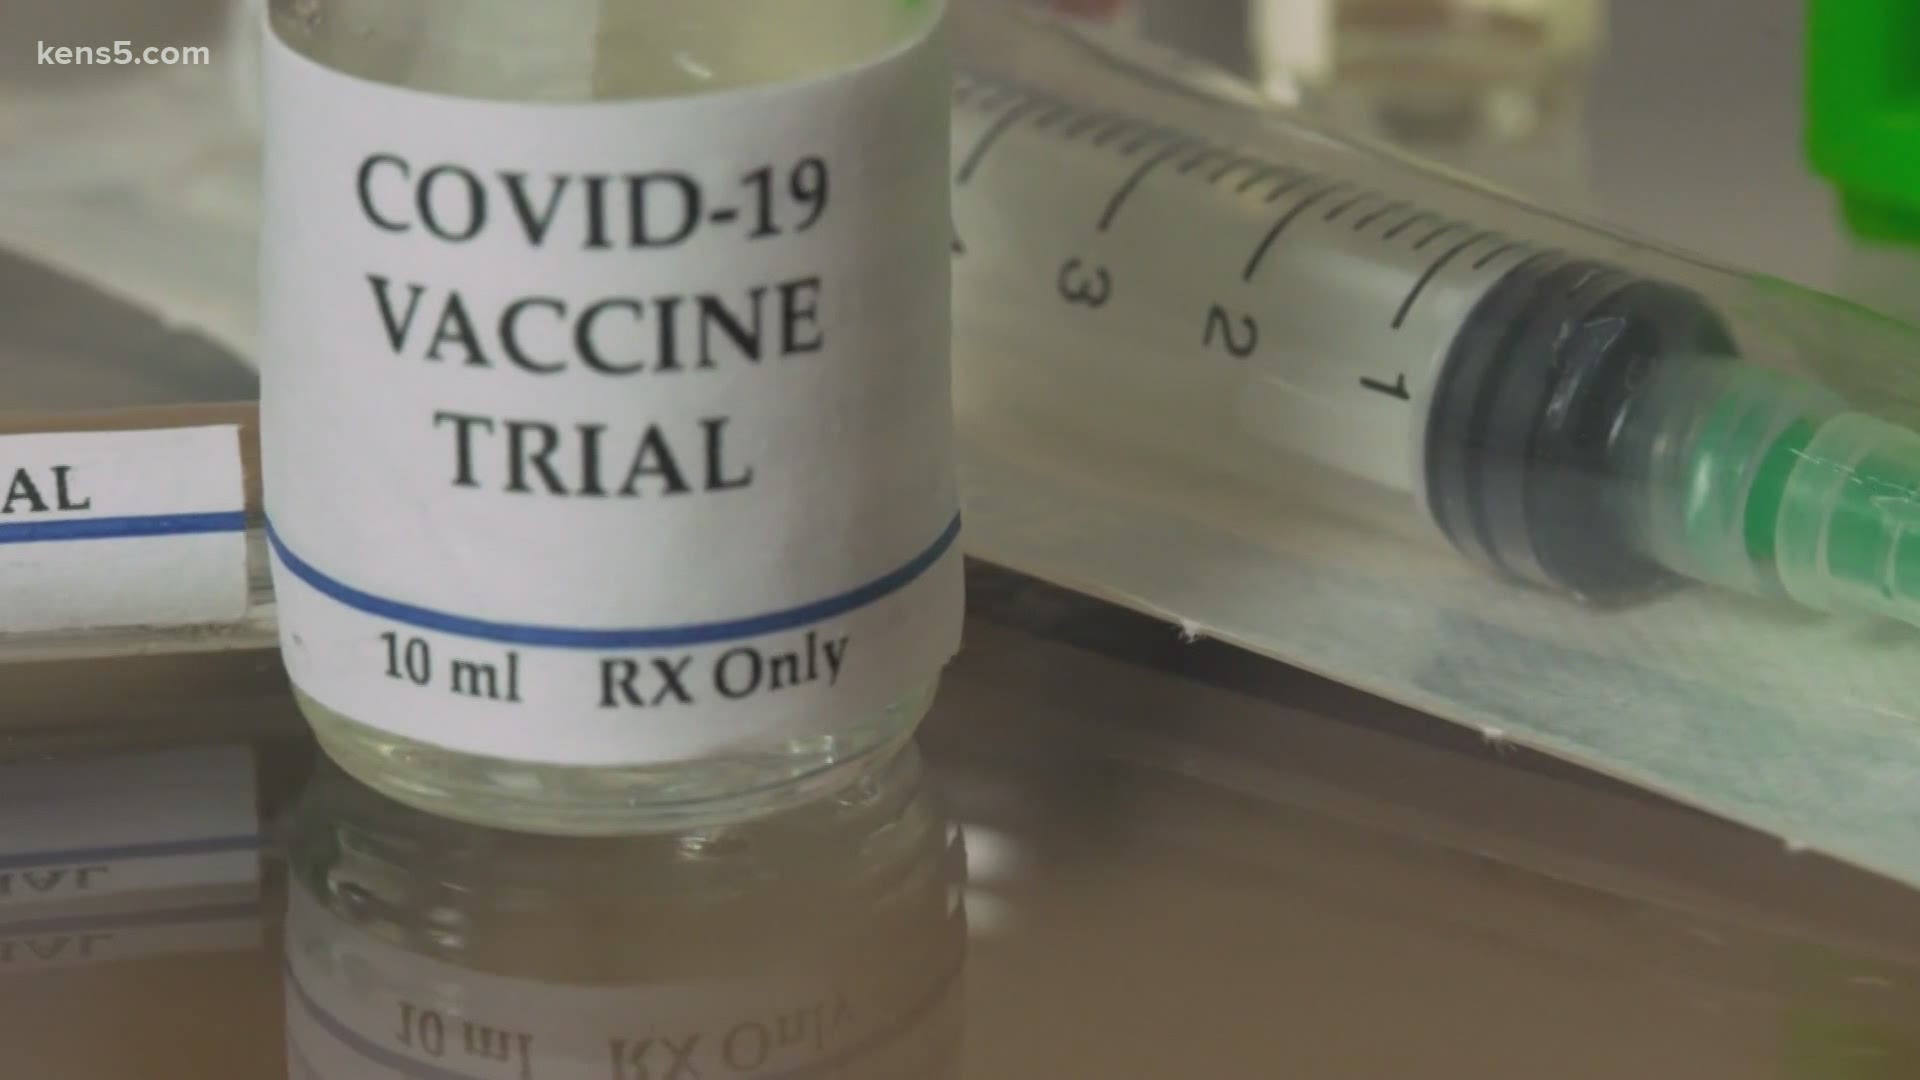 Some of the clinical trials for potential COVID-19 vaccines are taking place in San Antonio.